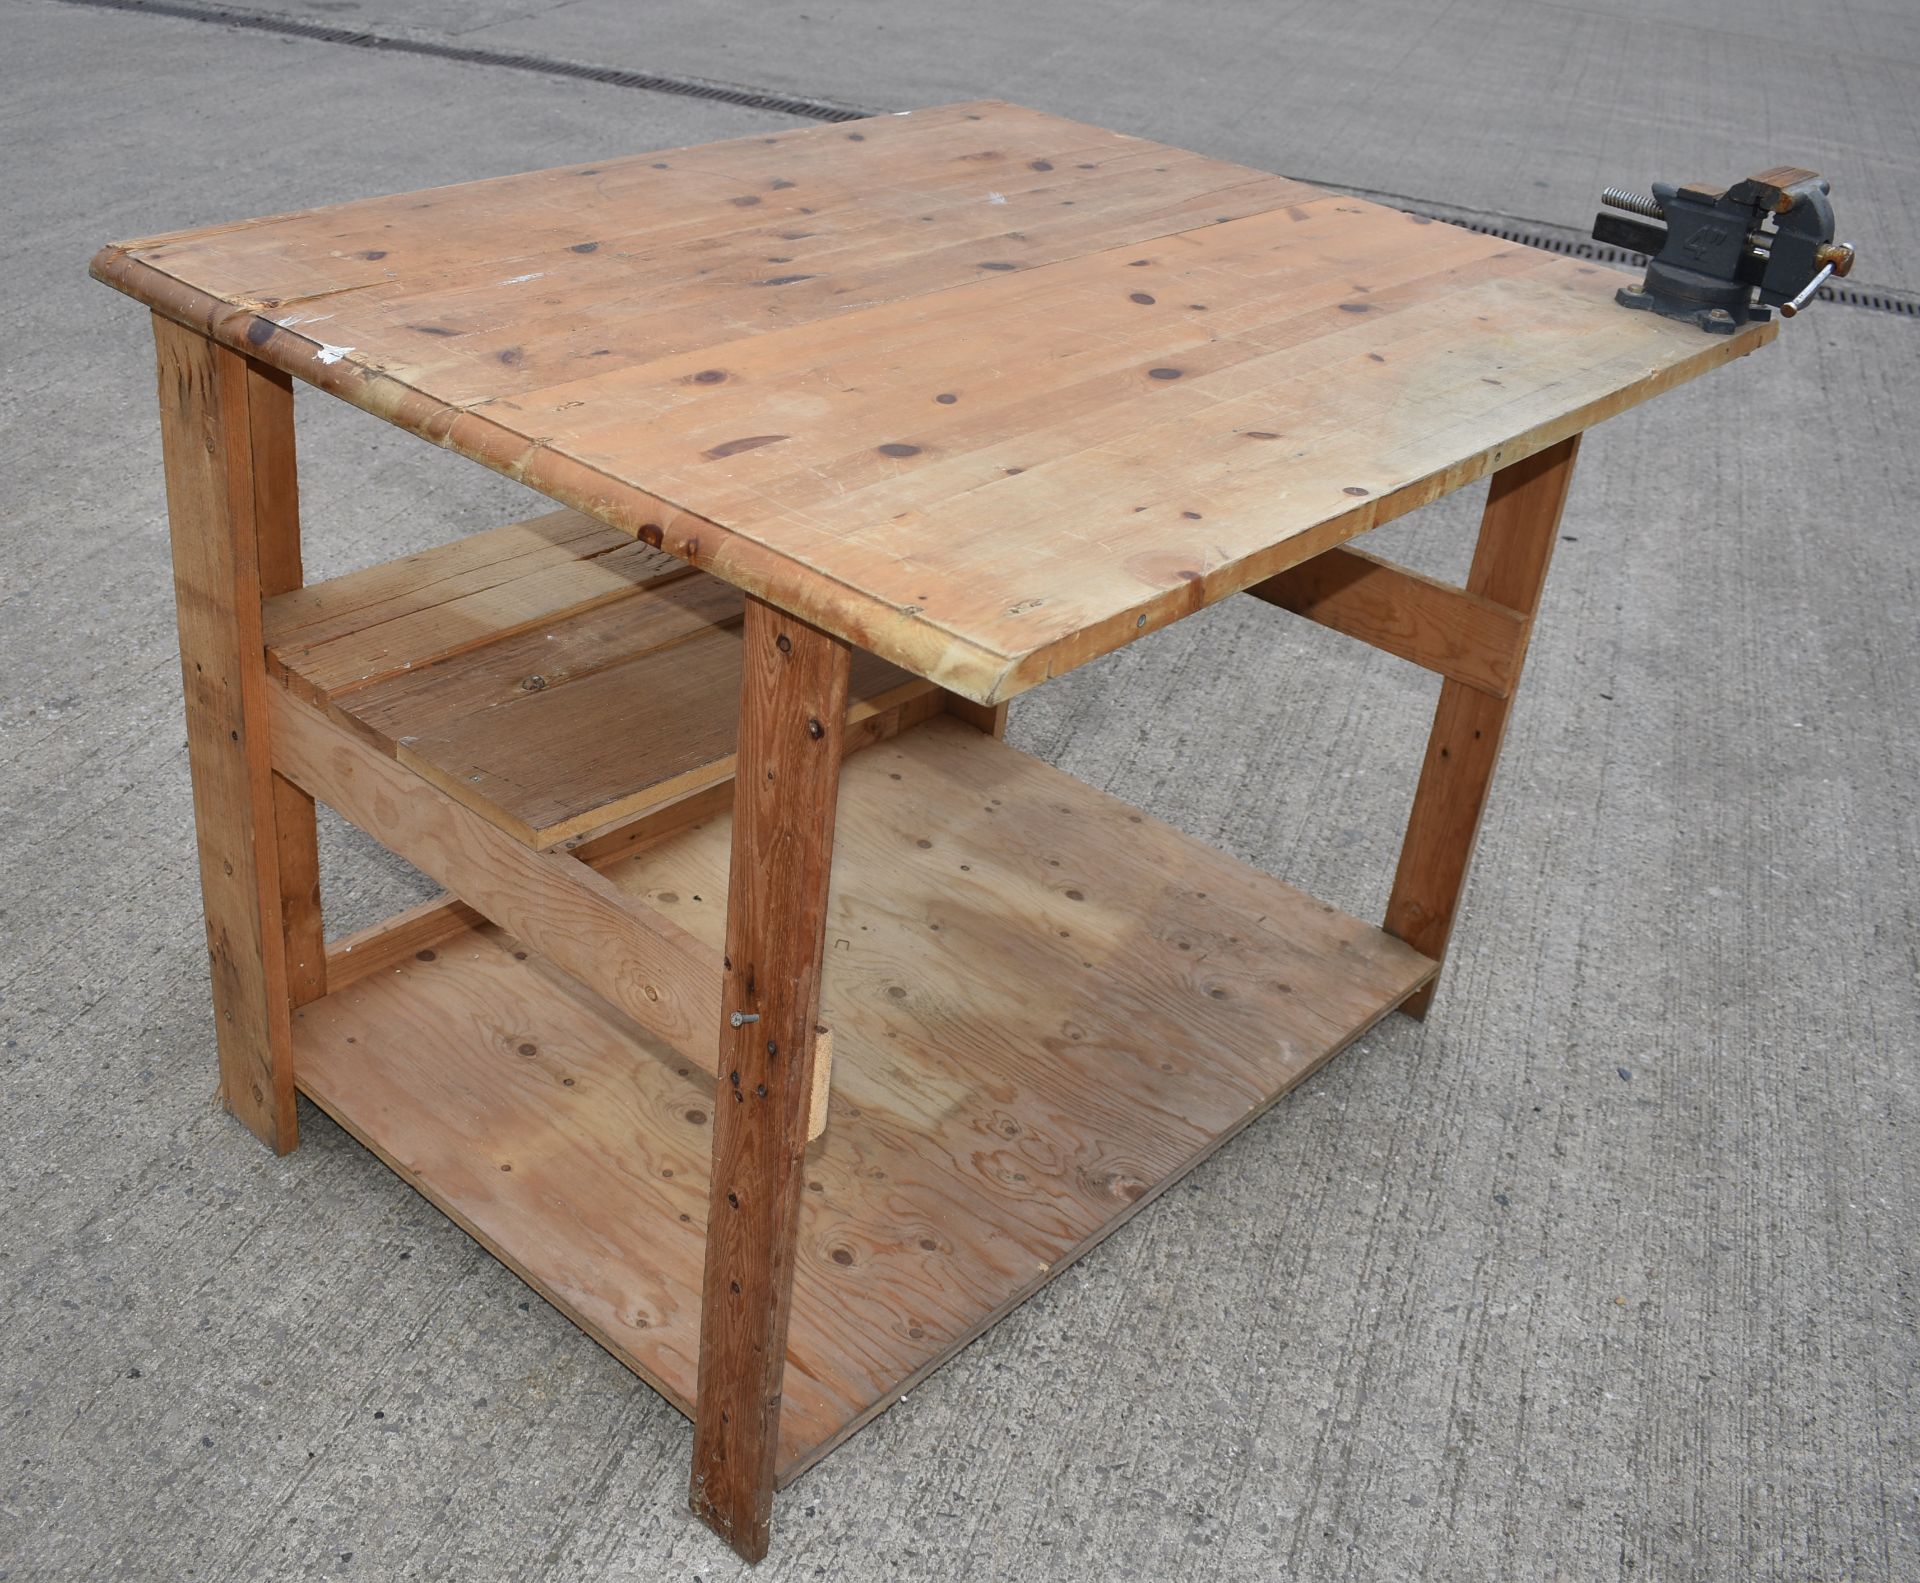 1 x Wooden Workbench With Stanley 4" Vice - 118 (L) x 94.5(D) x 88(H) cms - Ref: K234 - CL905 - Loca - Image 8 of 10